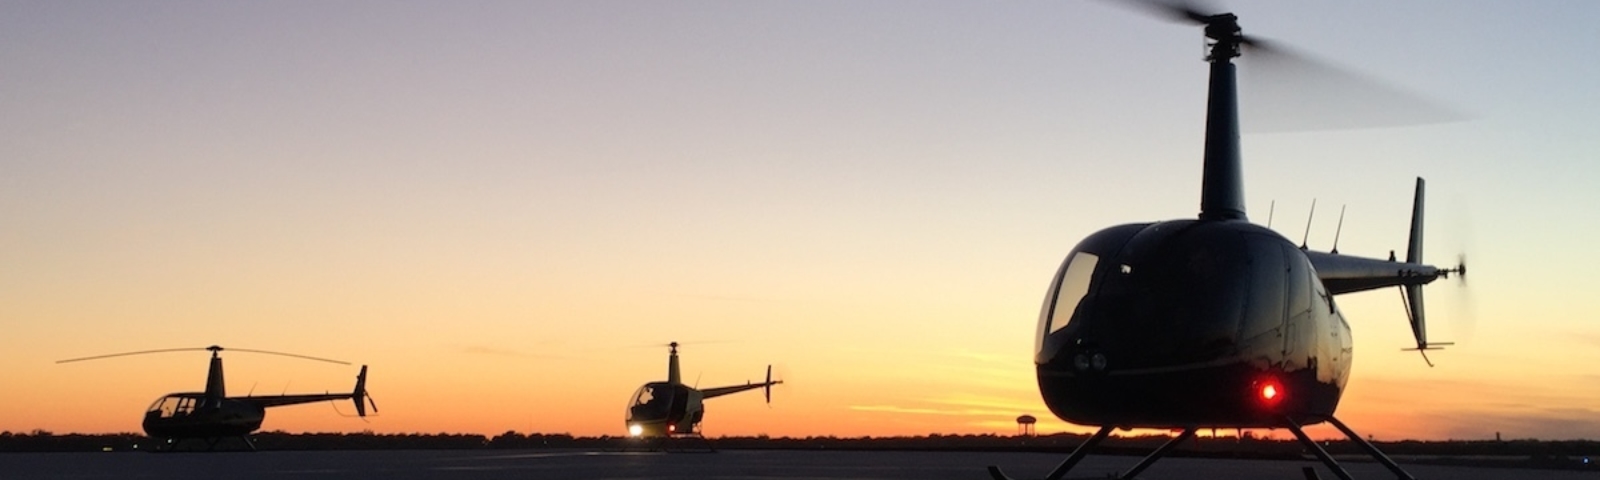 Sunset Helicopter Ride Dallas Fort Worth